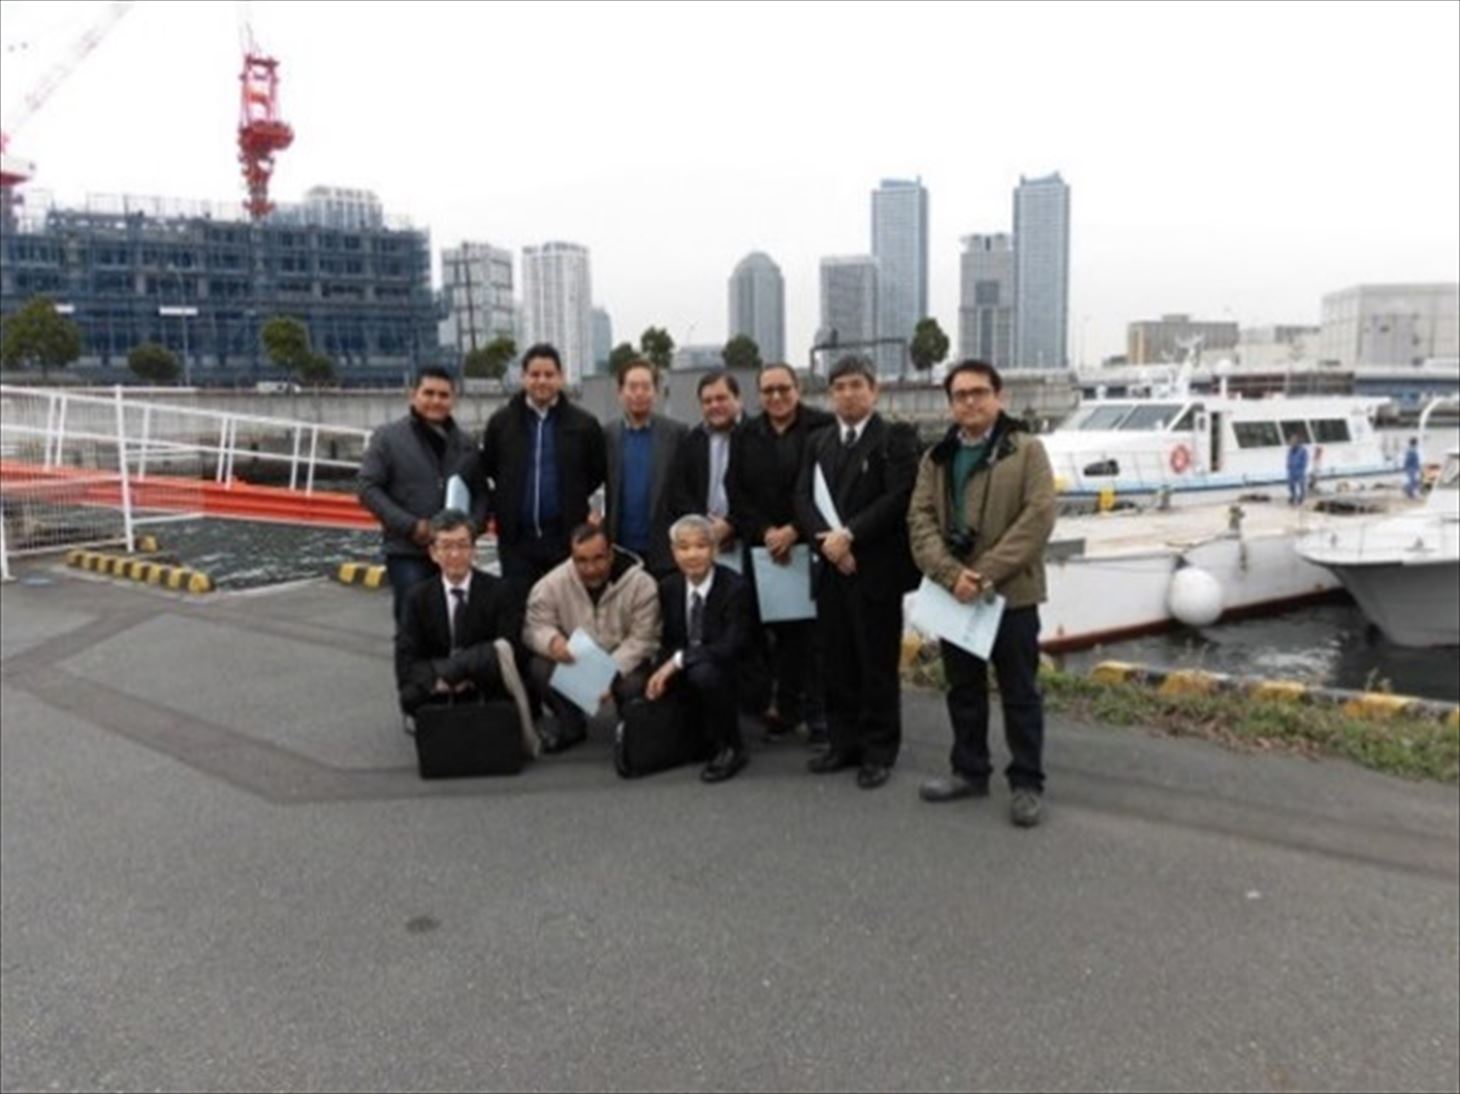 Photo 11: Investigation of Yokohama Port by the Mexican research team (March 2016)